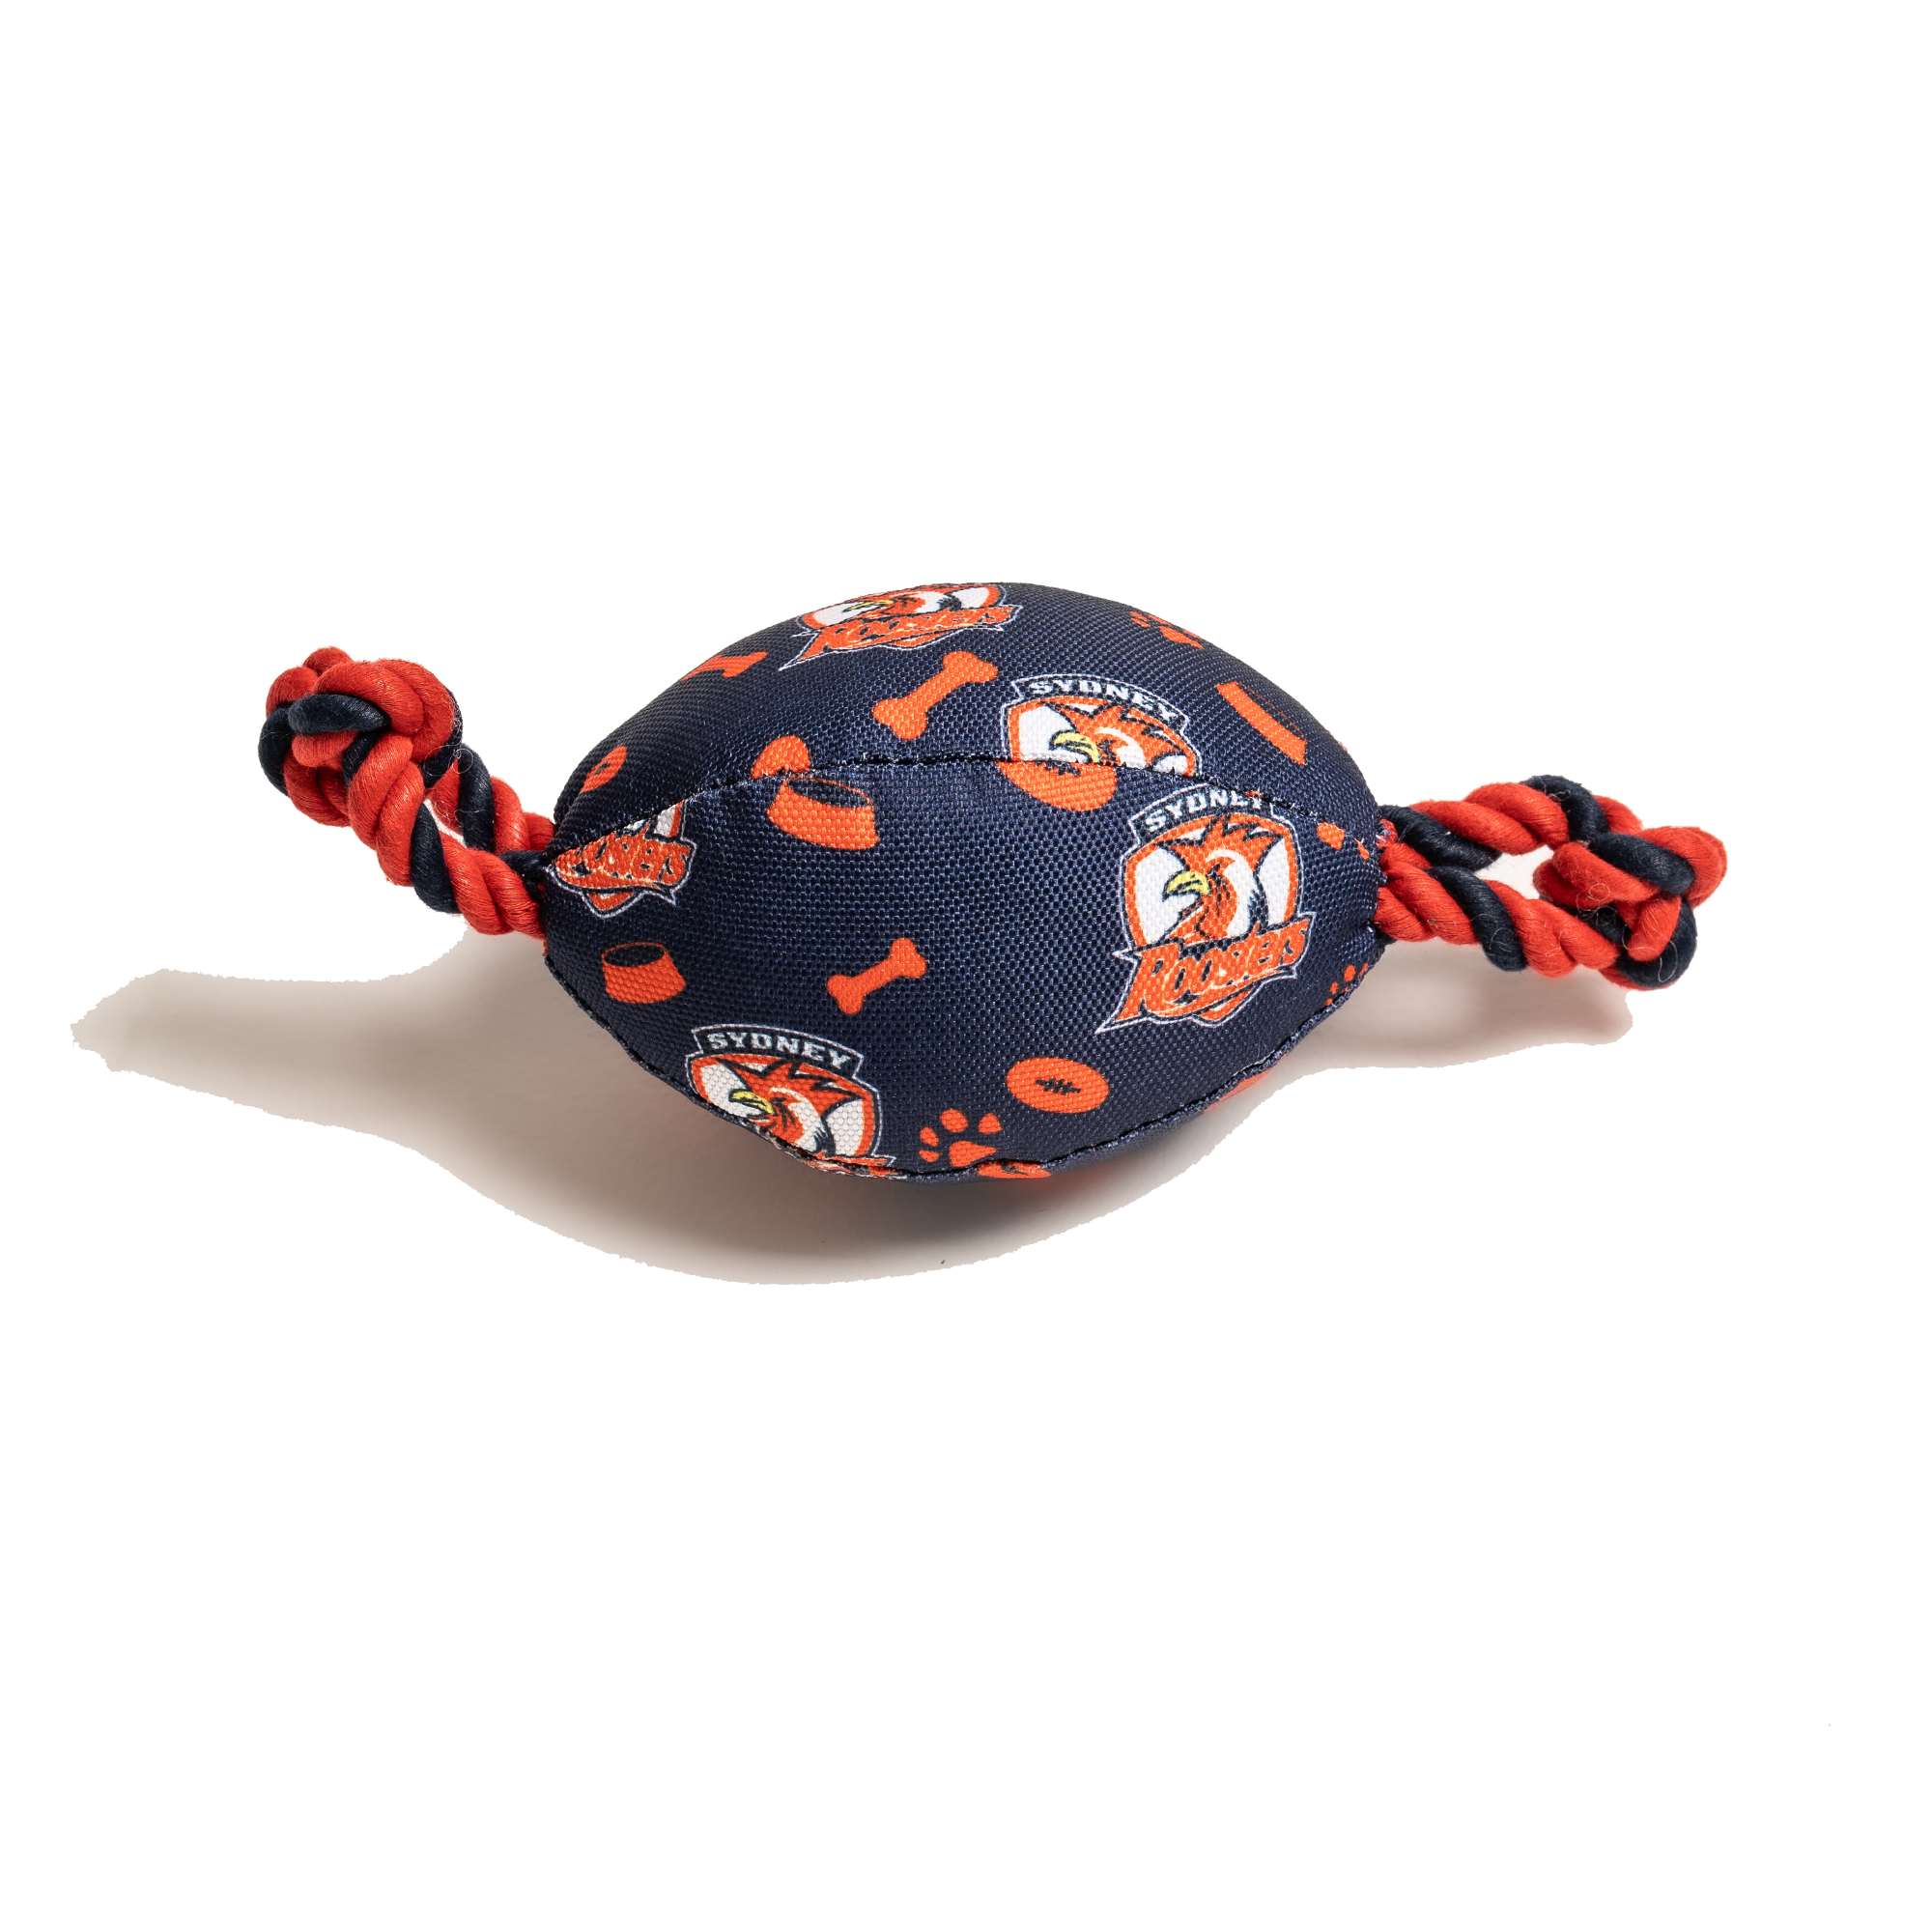 Sydney Roosters NRL Footy Chew Toy